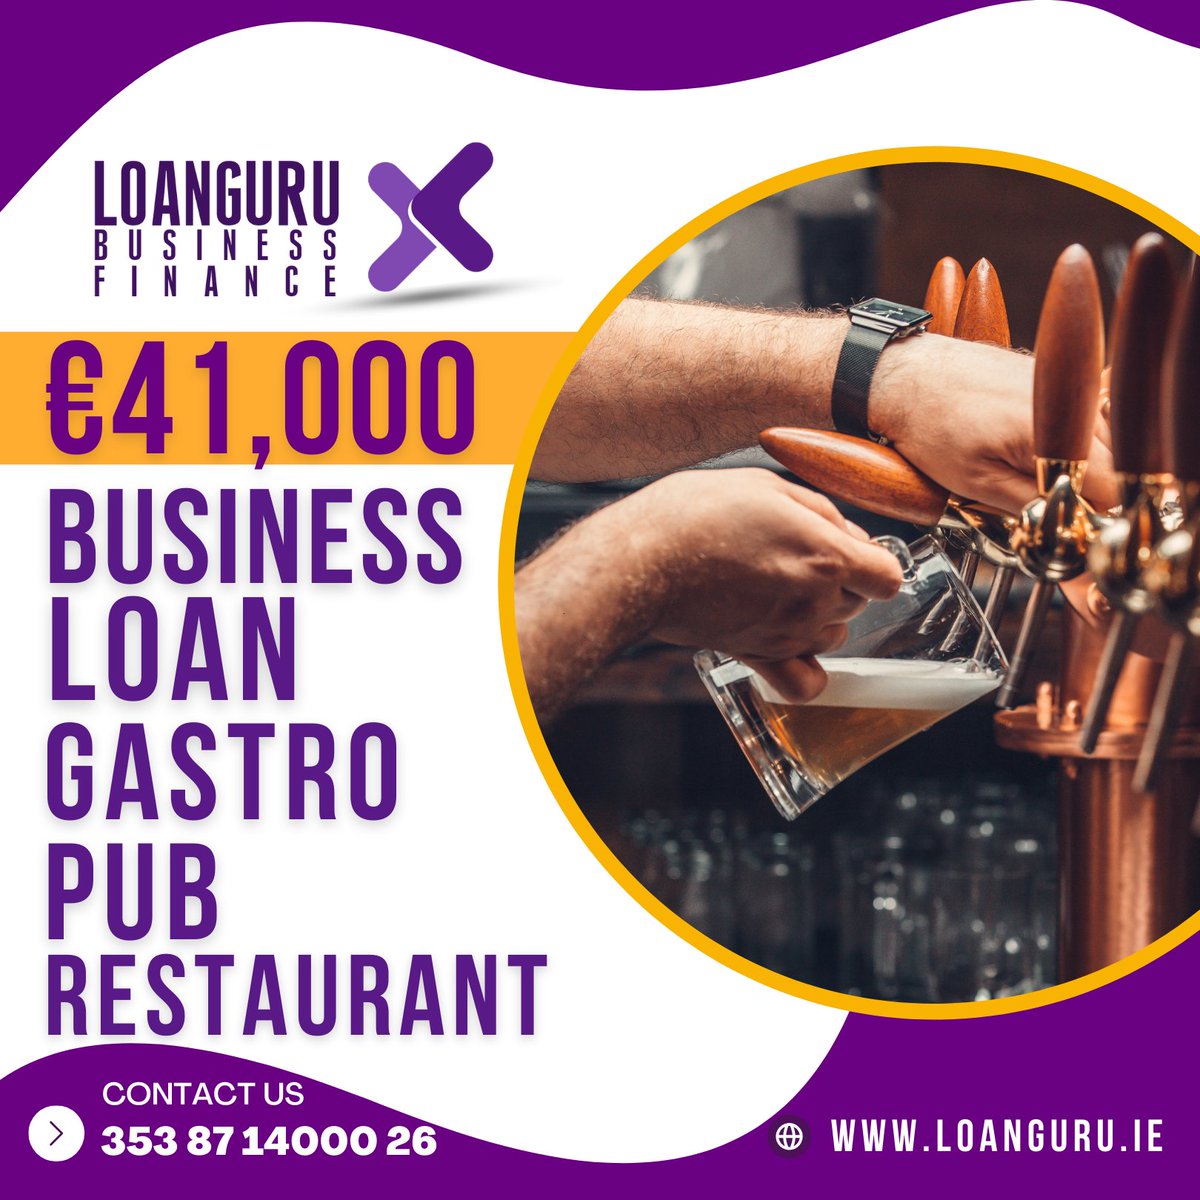 💡Customer Success Story This Week!

A Popular Gastro Pub & Restaurant with great food received €41,000 in Business Loan funding for working capital.

#irishbusinesses #lending #loangurubusinessfinance #businessloans #SMEbusinessloan #retailbusinessfinance #hospitalityfinance